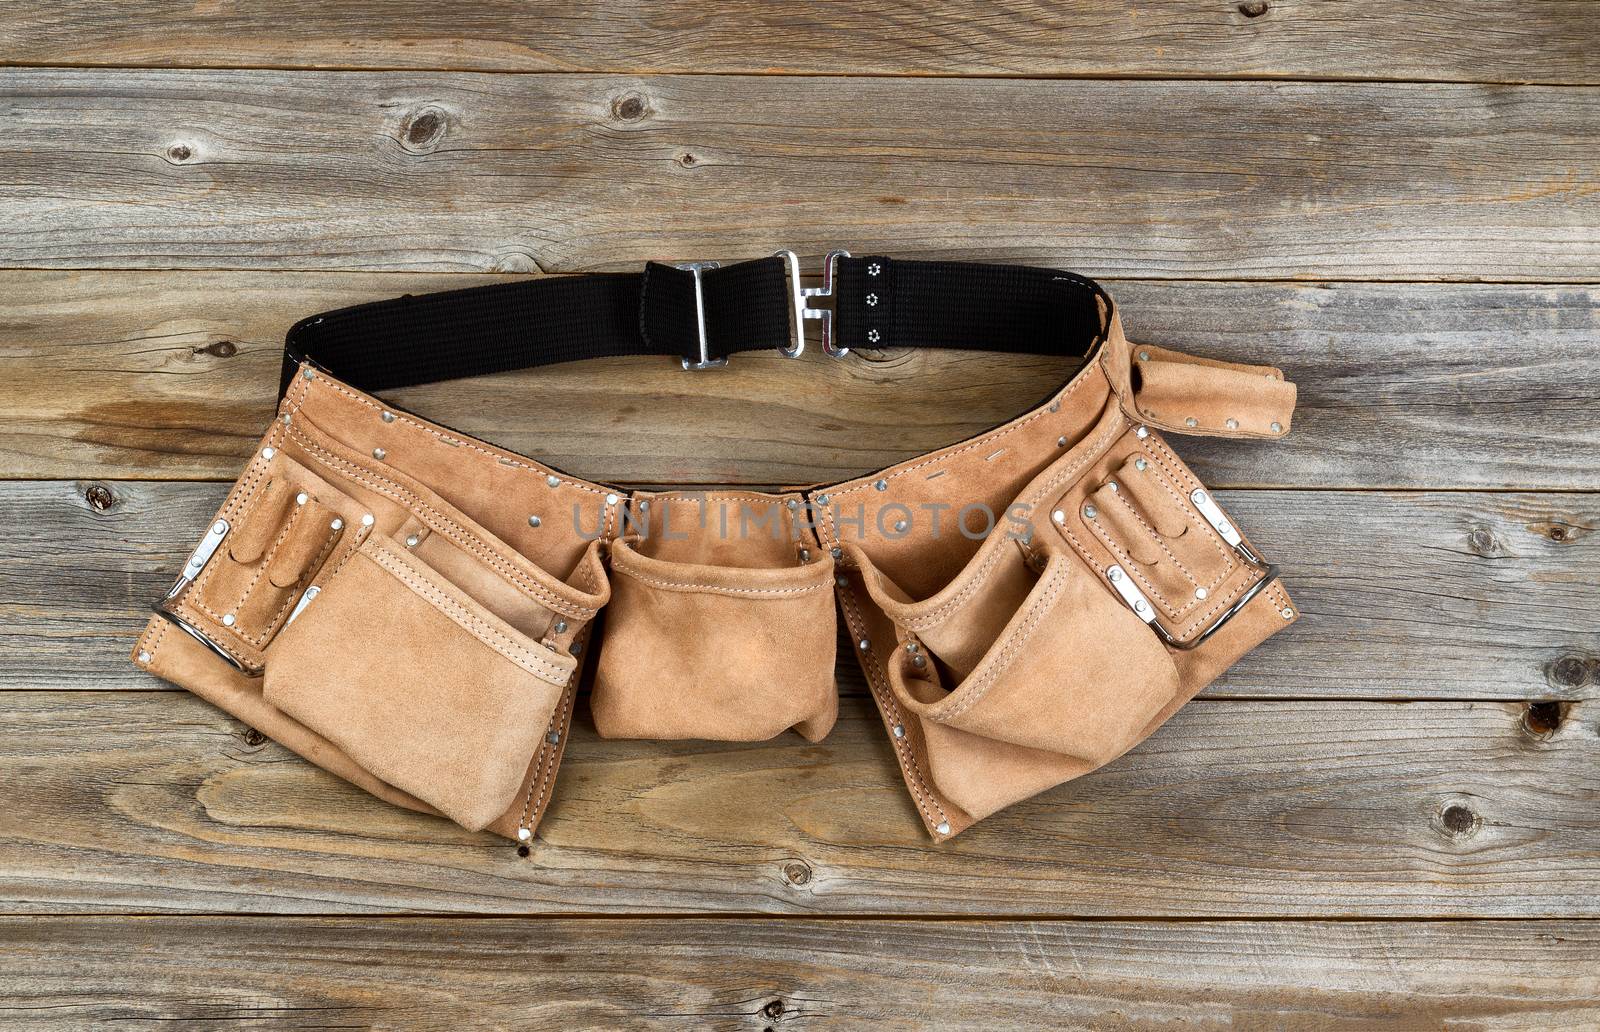 Leather tool belt on rustic wooden boards  by tab1962